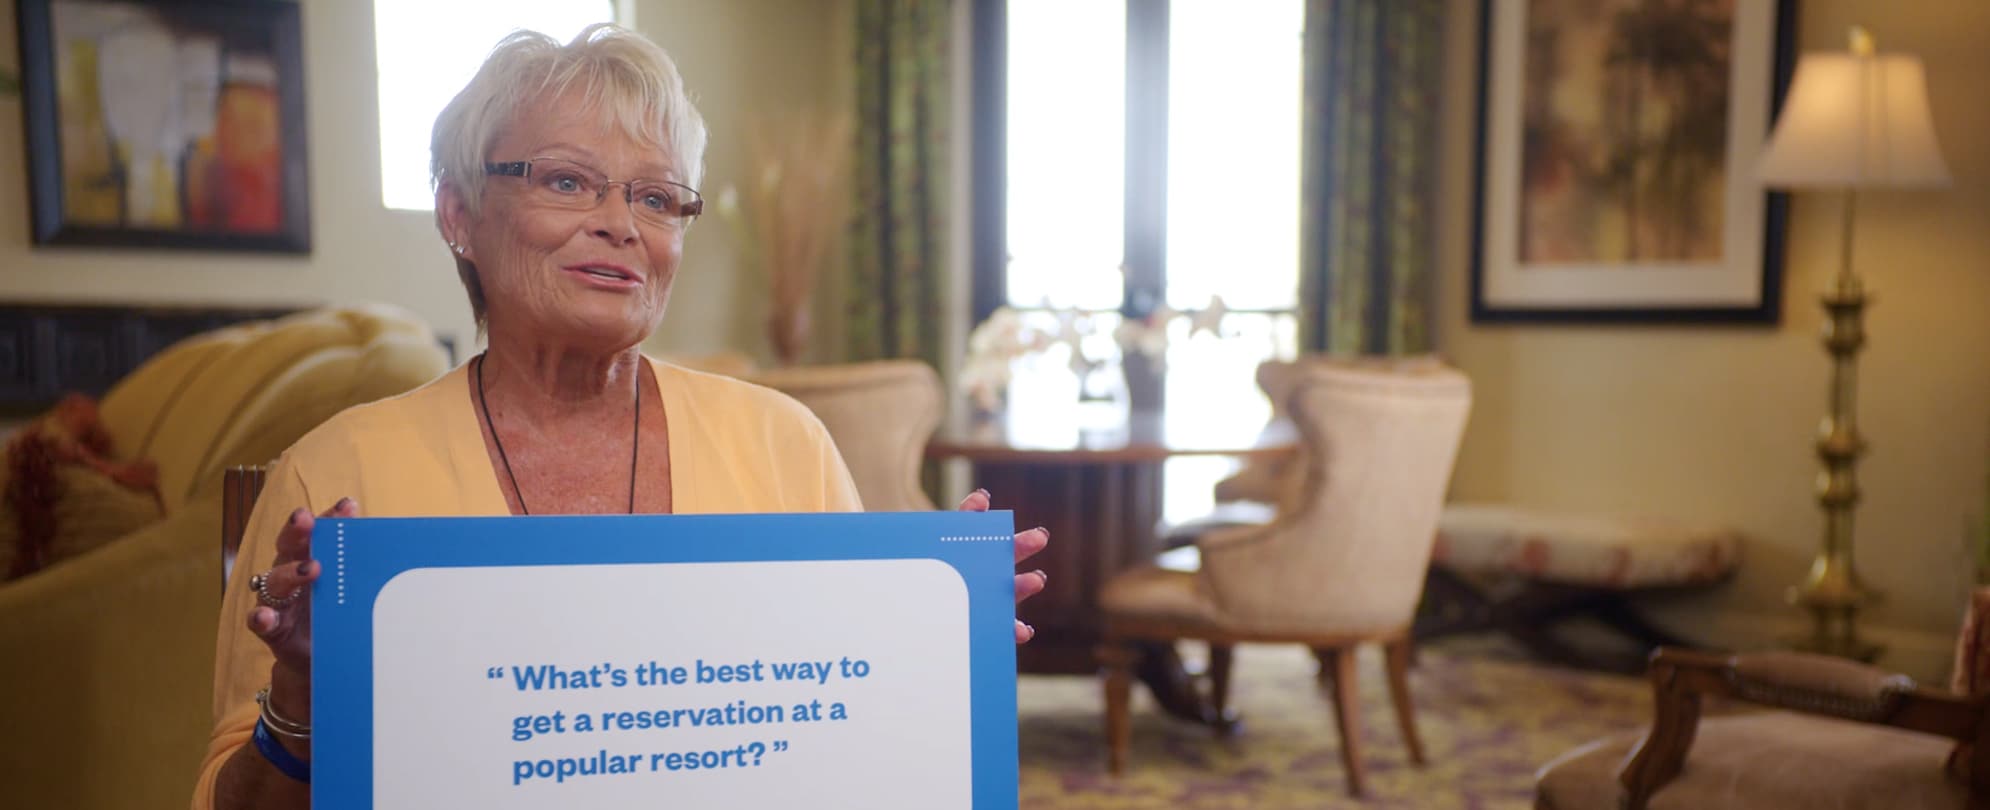 An older woman holding a sign that says “What’s the best way to get a reservation at a popular resort?” 